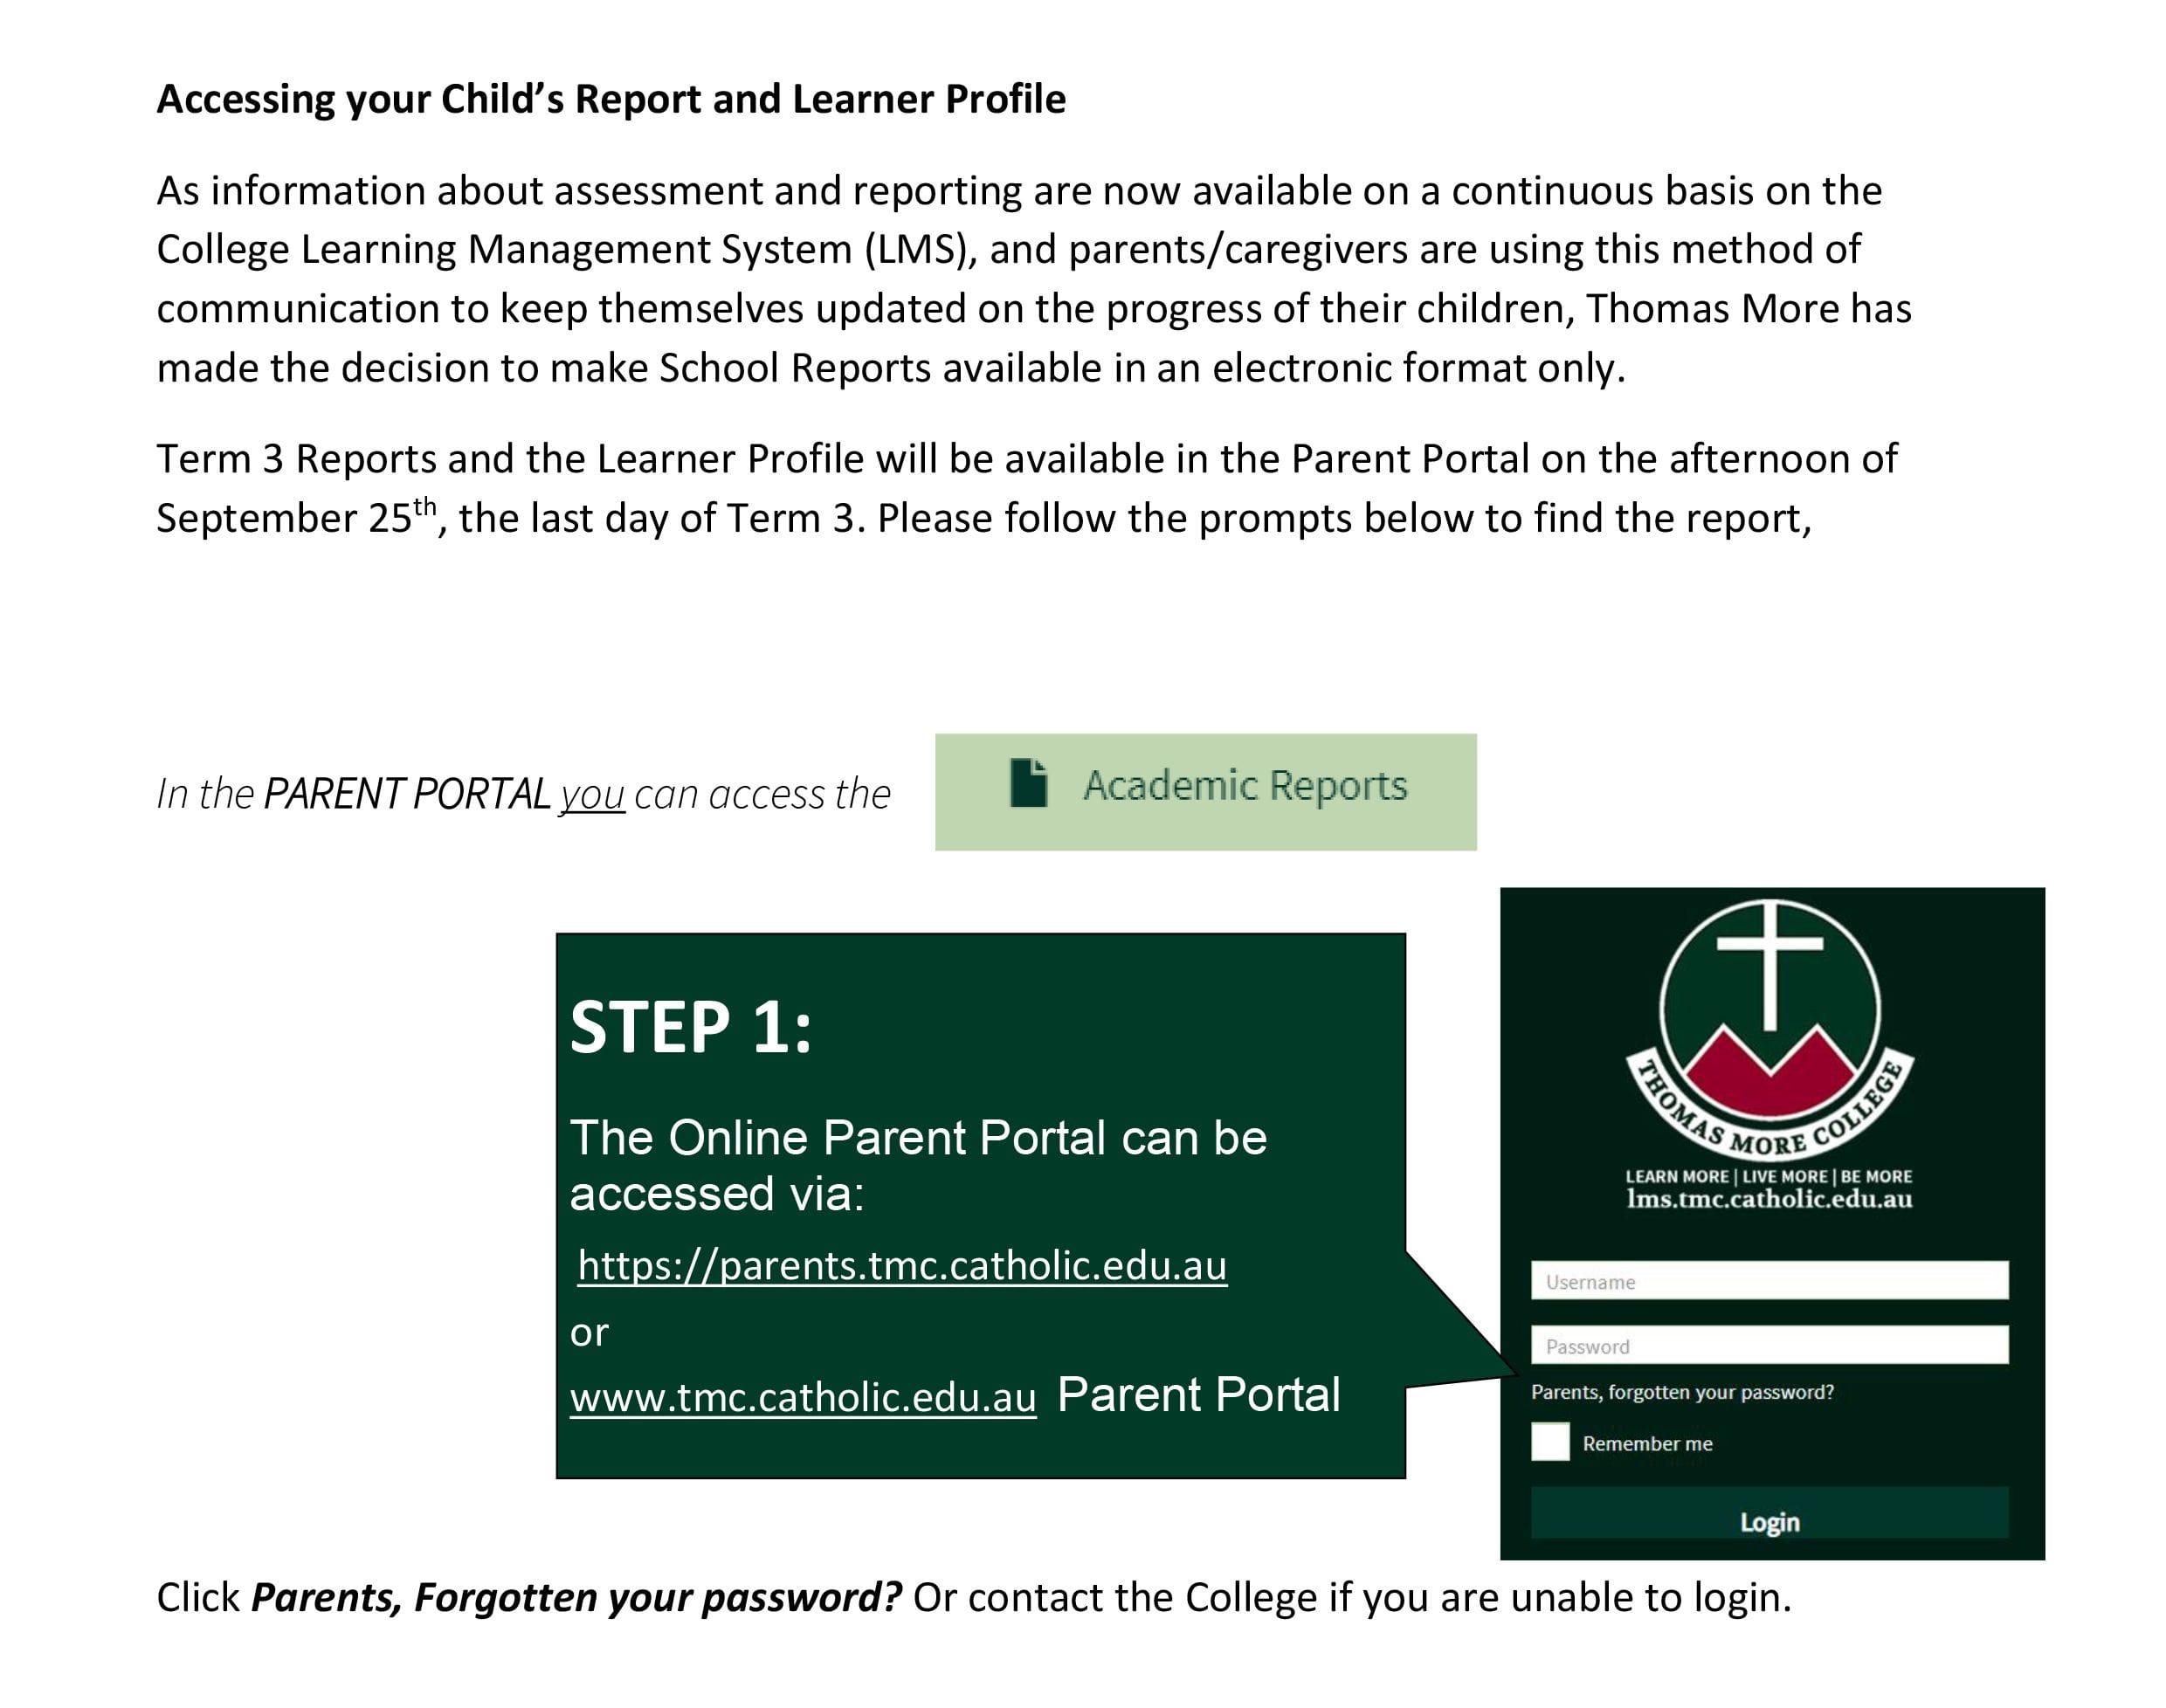 Reporting Parent Information